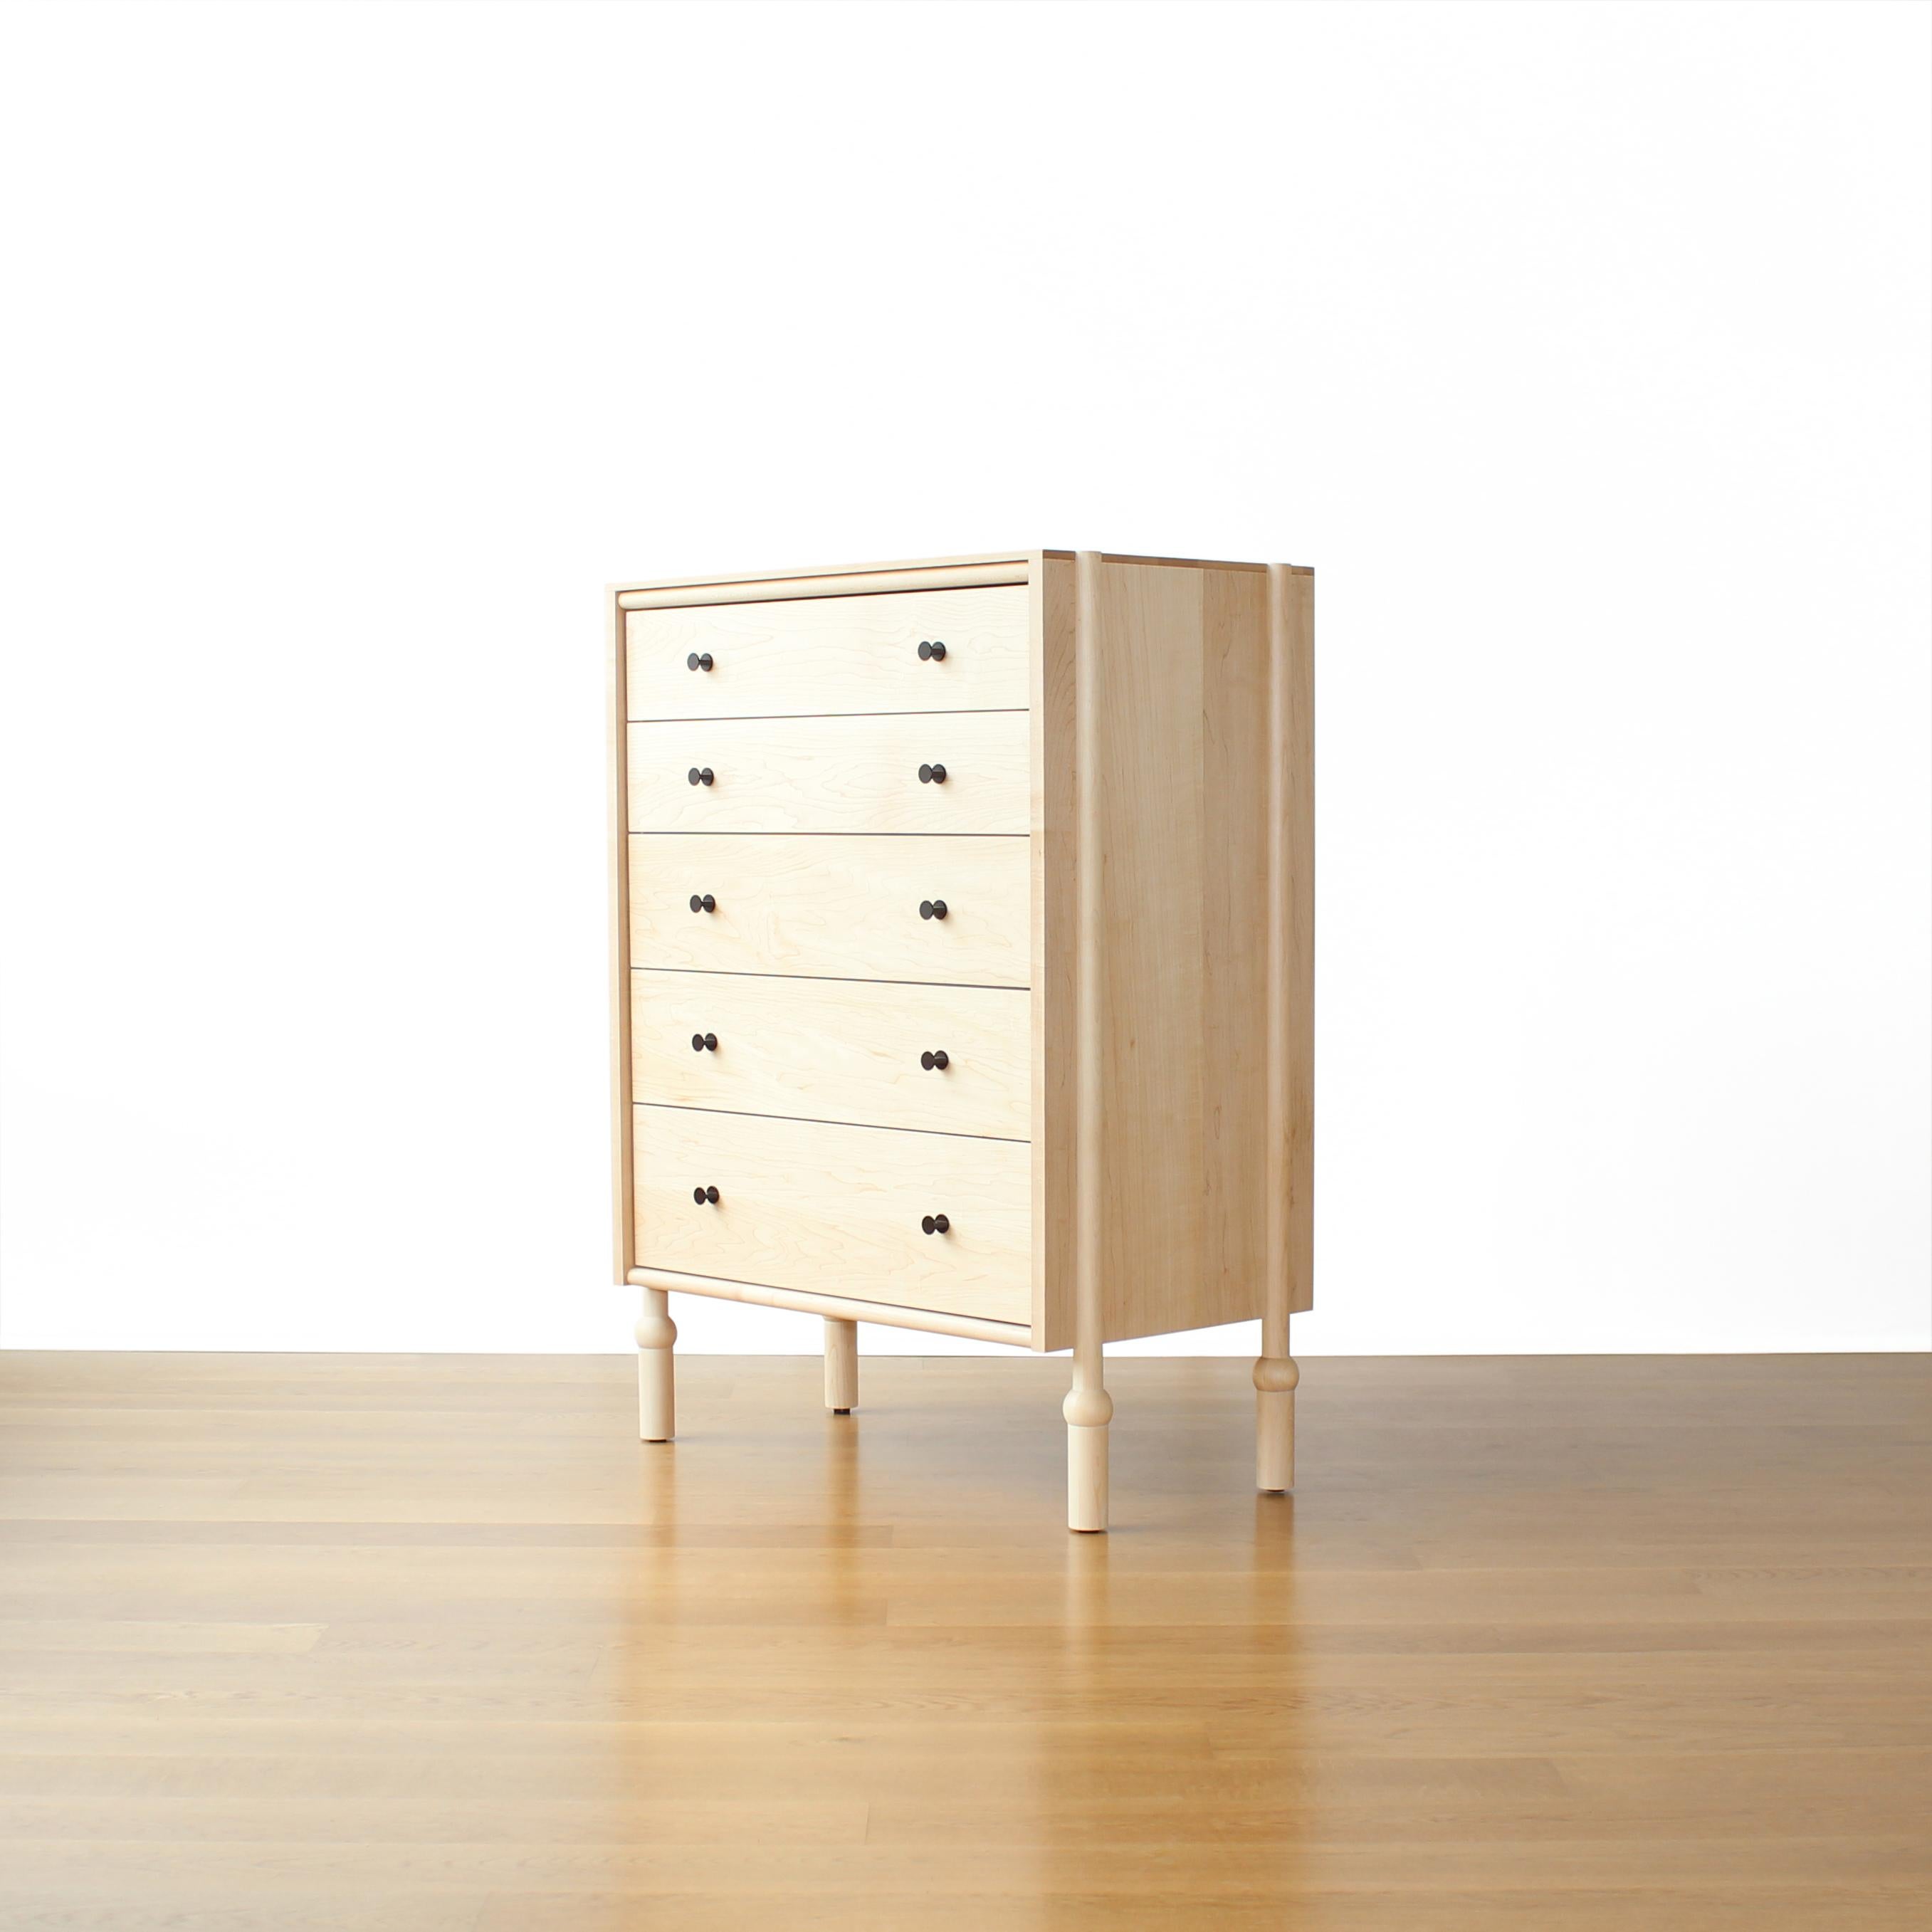 Mae highboy dresser by Crump and Kwash.

The Mae Highboy features a solid wood case, hand turned legs, and an oiled or acrylic finish. The pulls are milled from solid brass and given a patinated finish. All drawers feature premium, full extension,